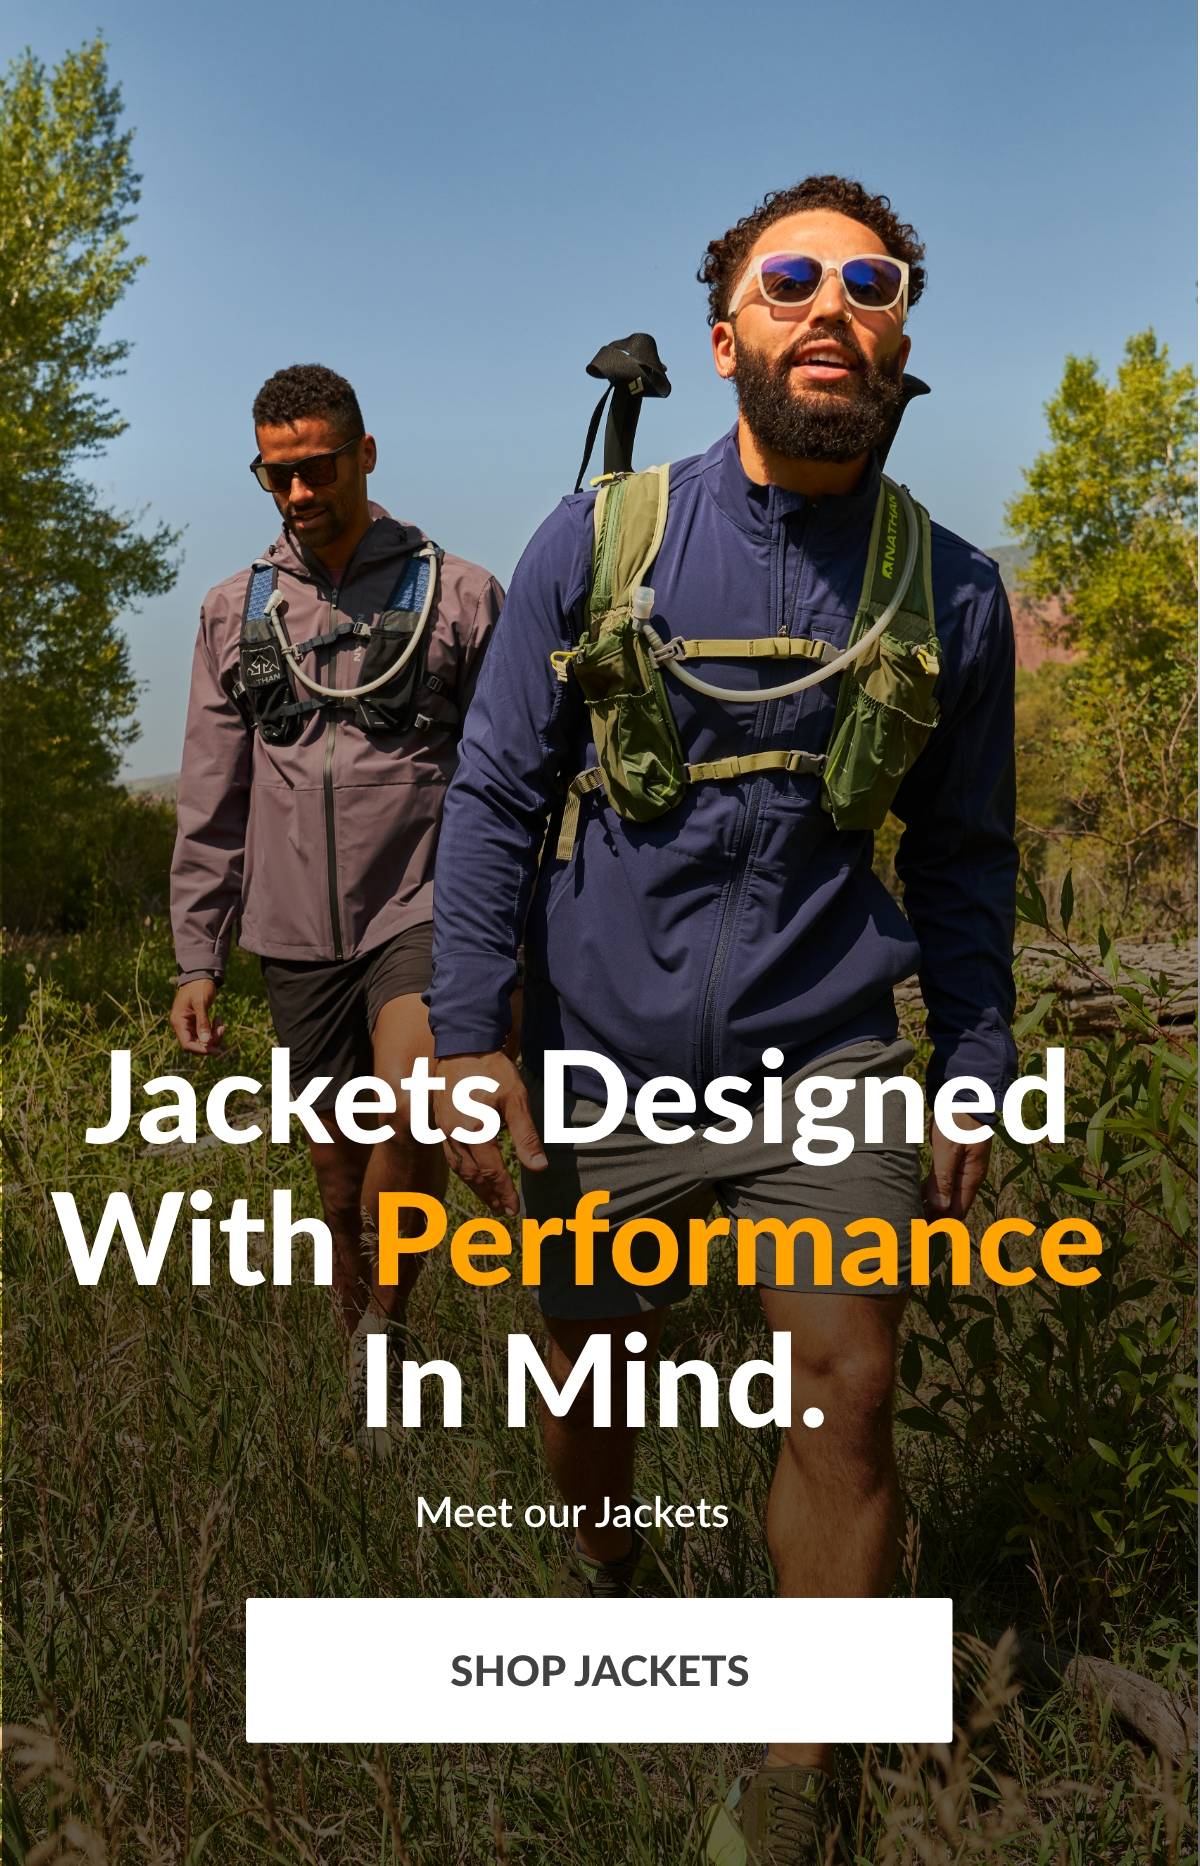 Jackets designed with performance in mind.